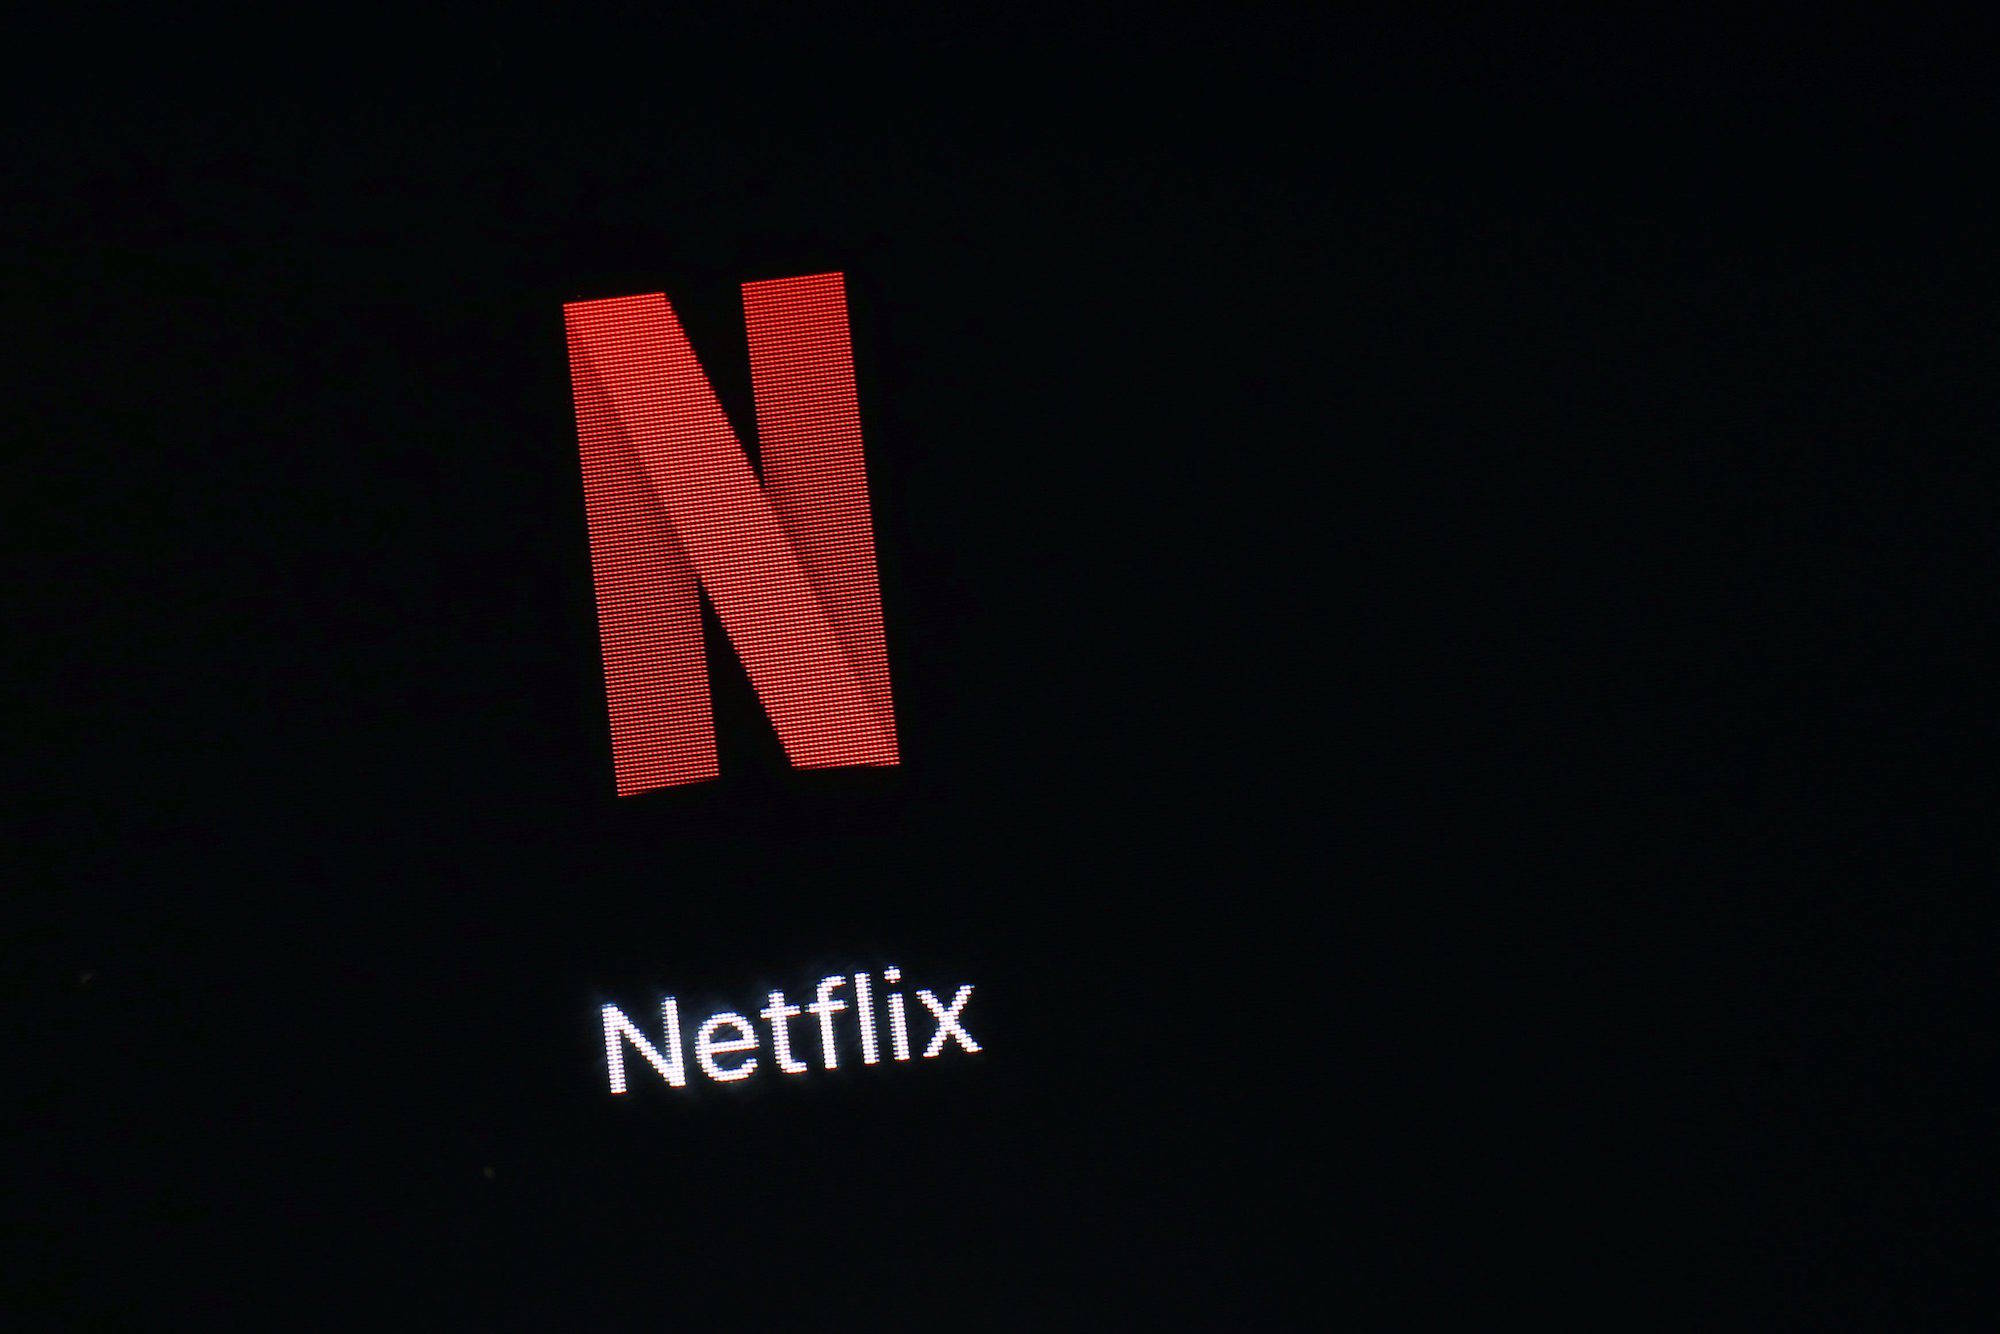 A Liberal-dominated House of Commons committee is calling on the Trudeau government to make Internet giants like Netflix collect and remit sales taxes on their services. THE CANADIAN PRESS/AP/Patrick Semansky